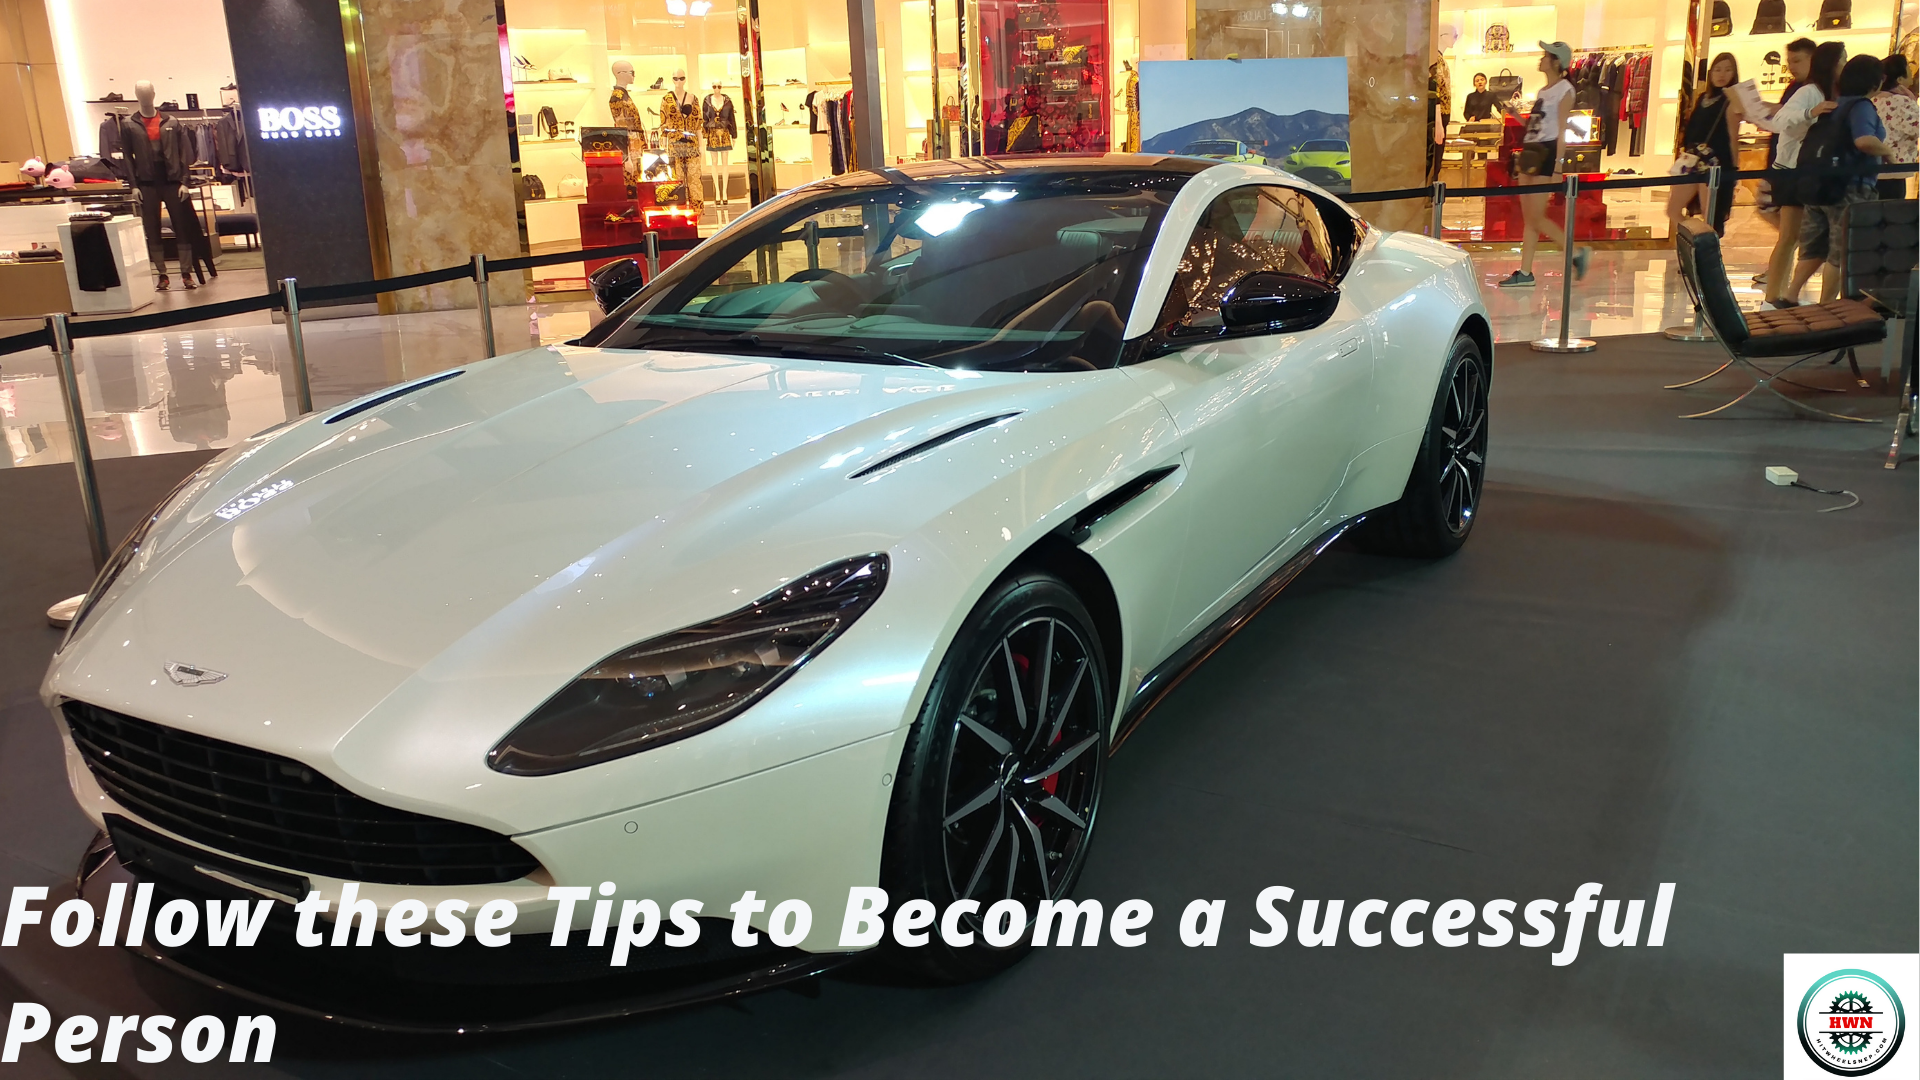 Follow these Tips to Become a Successful Person